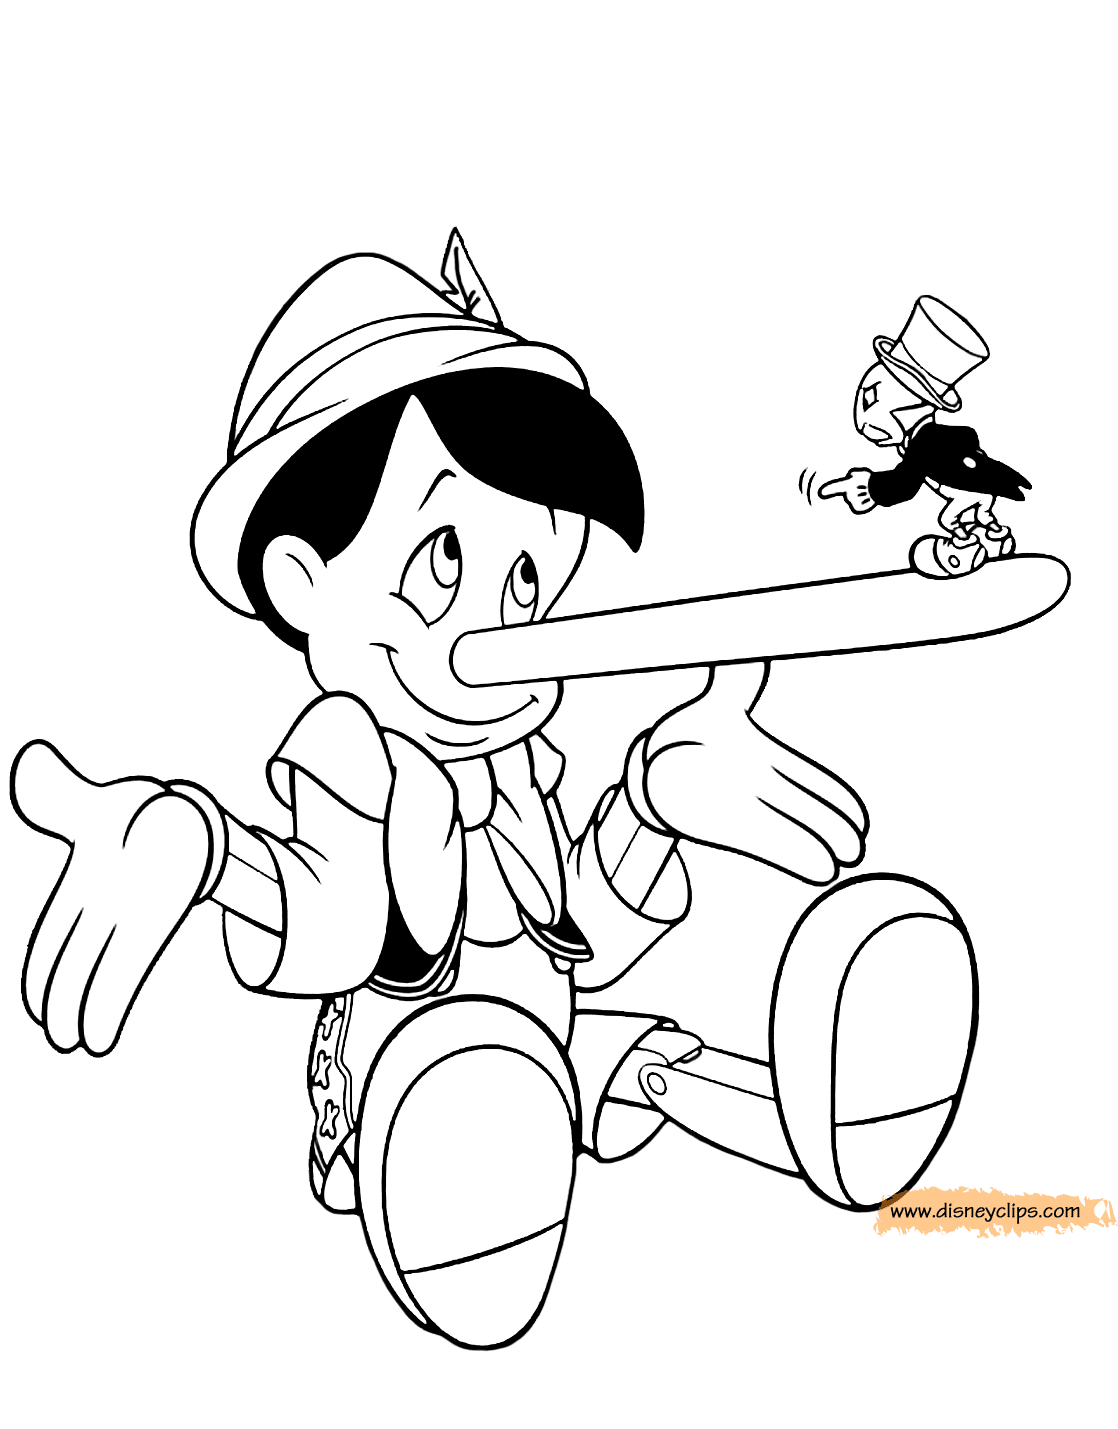 Pinocchio Coloring Page Disneys Pinocchio Coloring Pages 2 Disneyclips